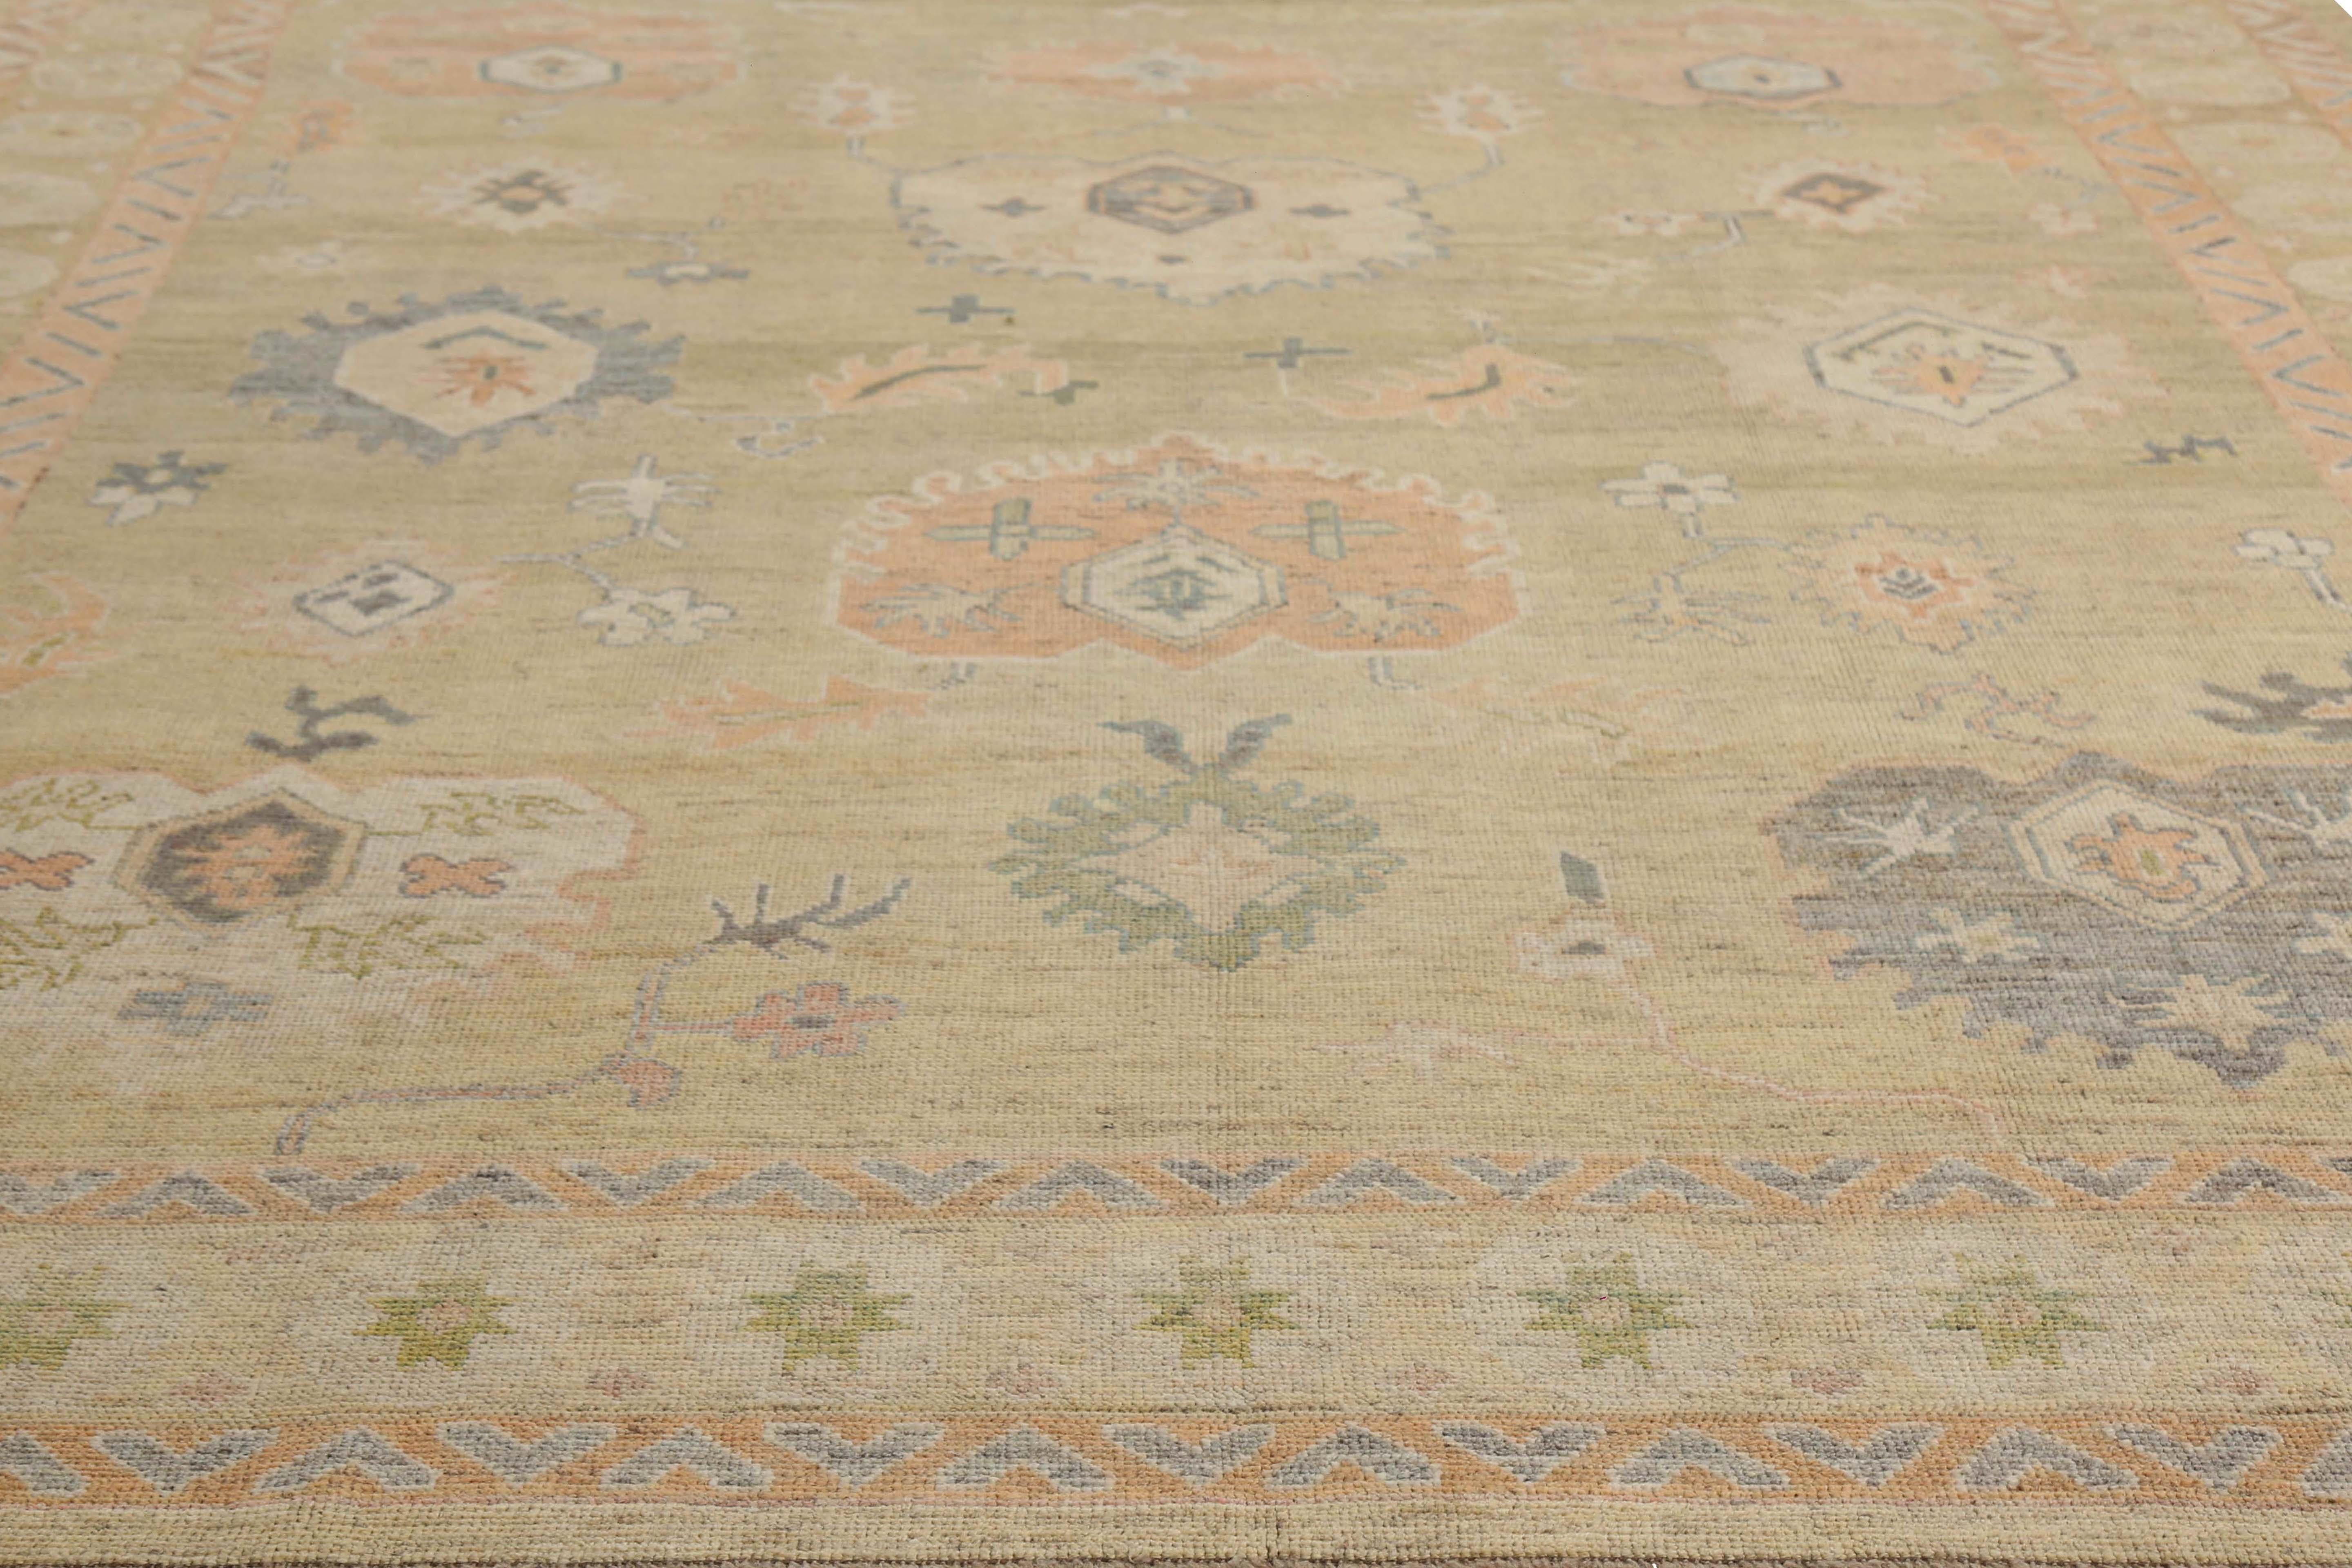 This exquisite 9'8'' x 12'10'' Oushak rug is a true masterpiece of Turkish craftsmanship. The rug features a stunning beige background with natural coloring that will complement any decor style. The design is composed of intricate motifs in blue,